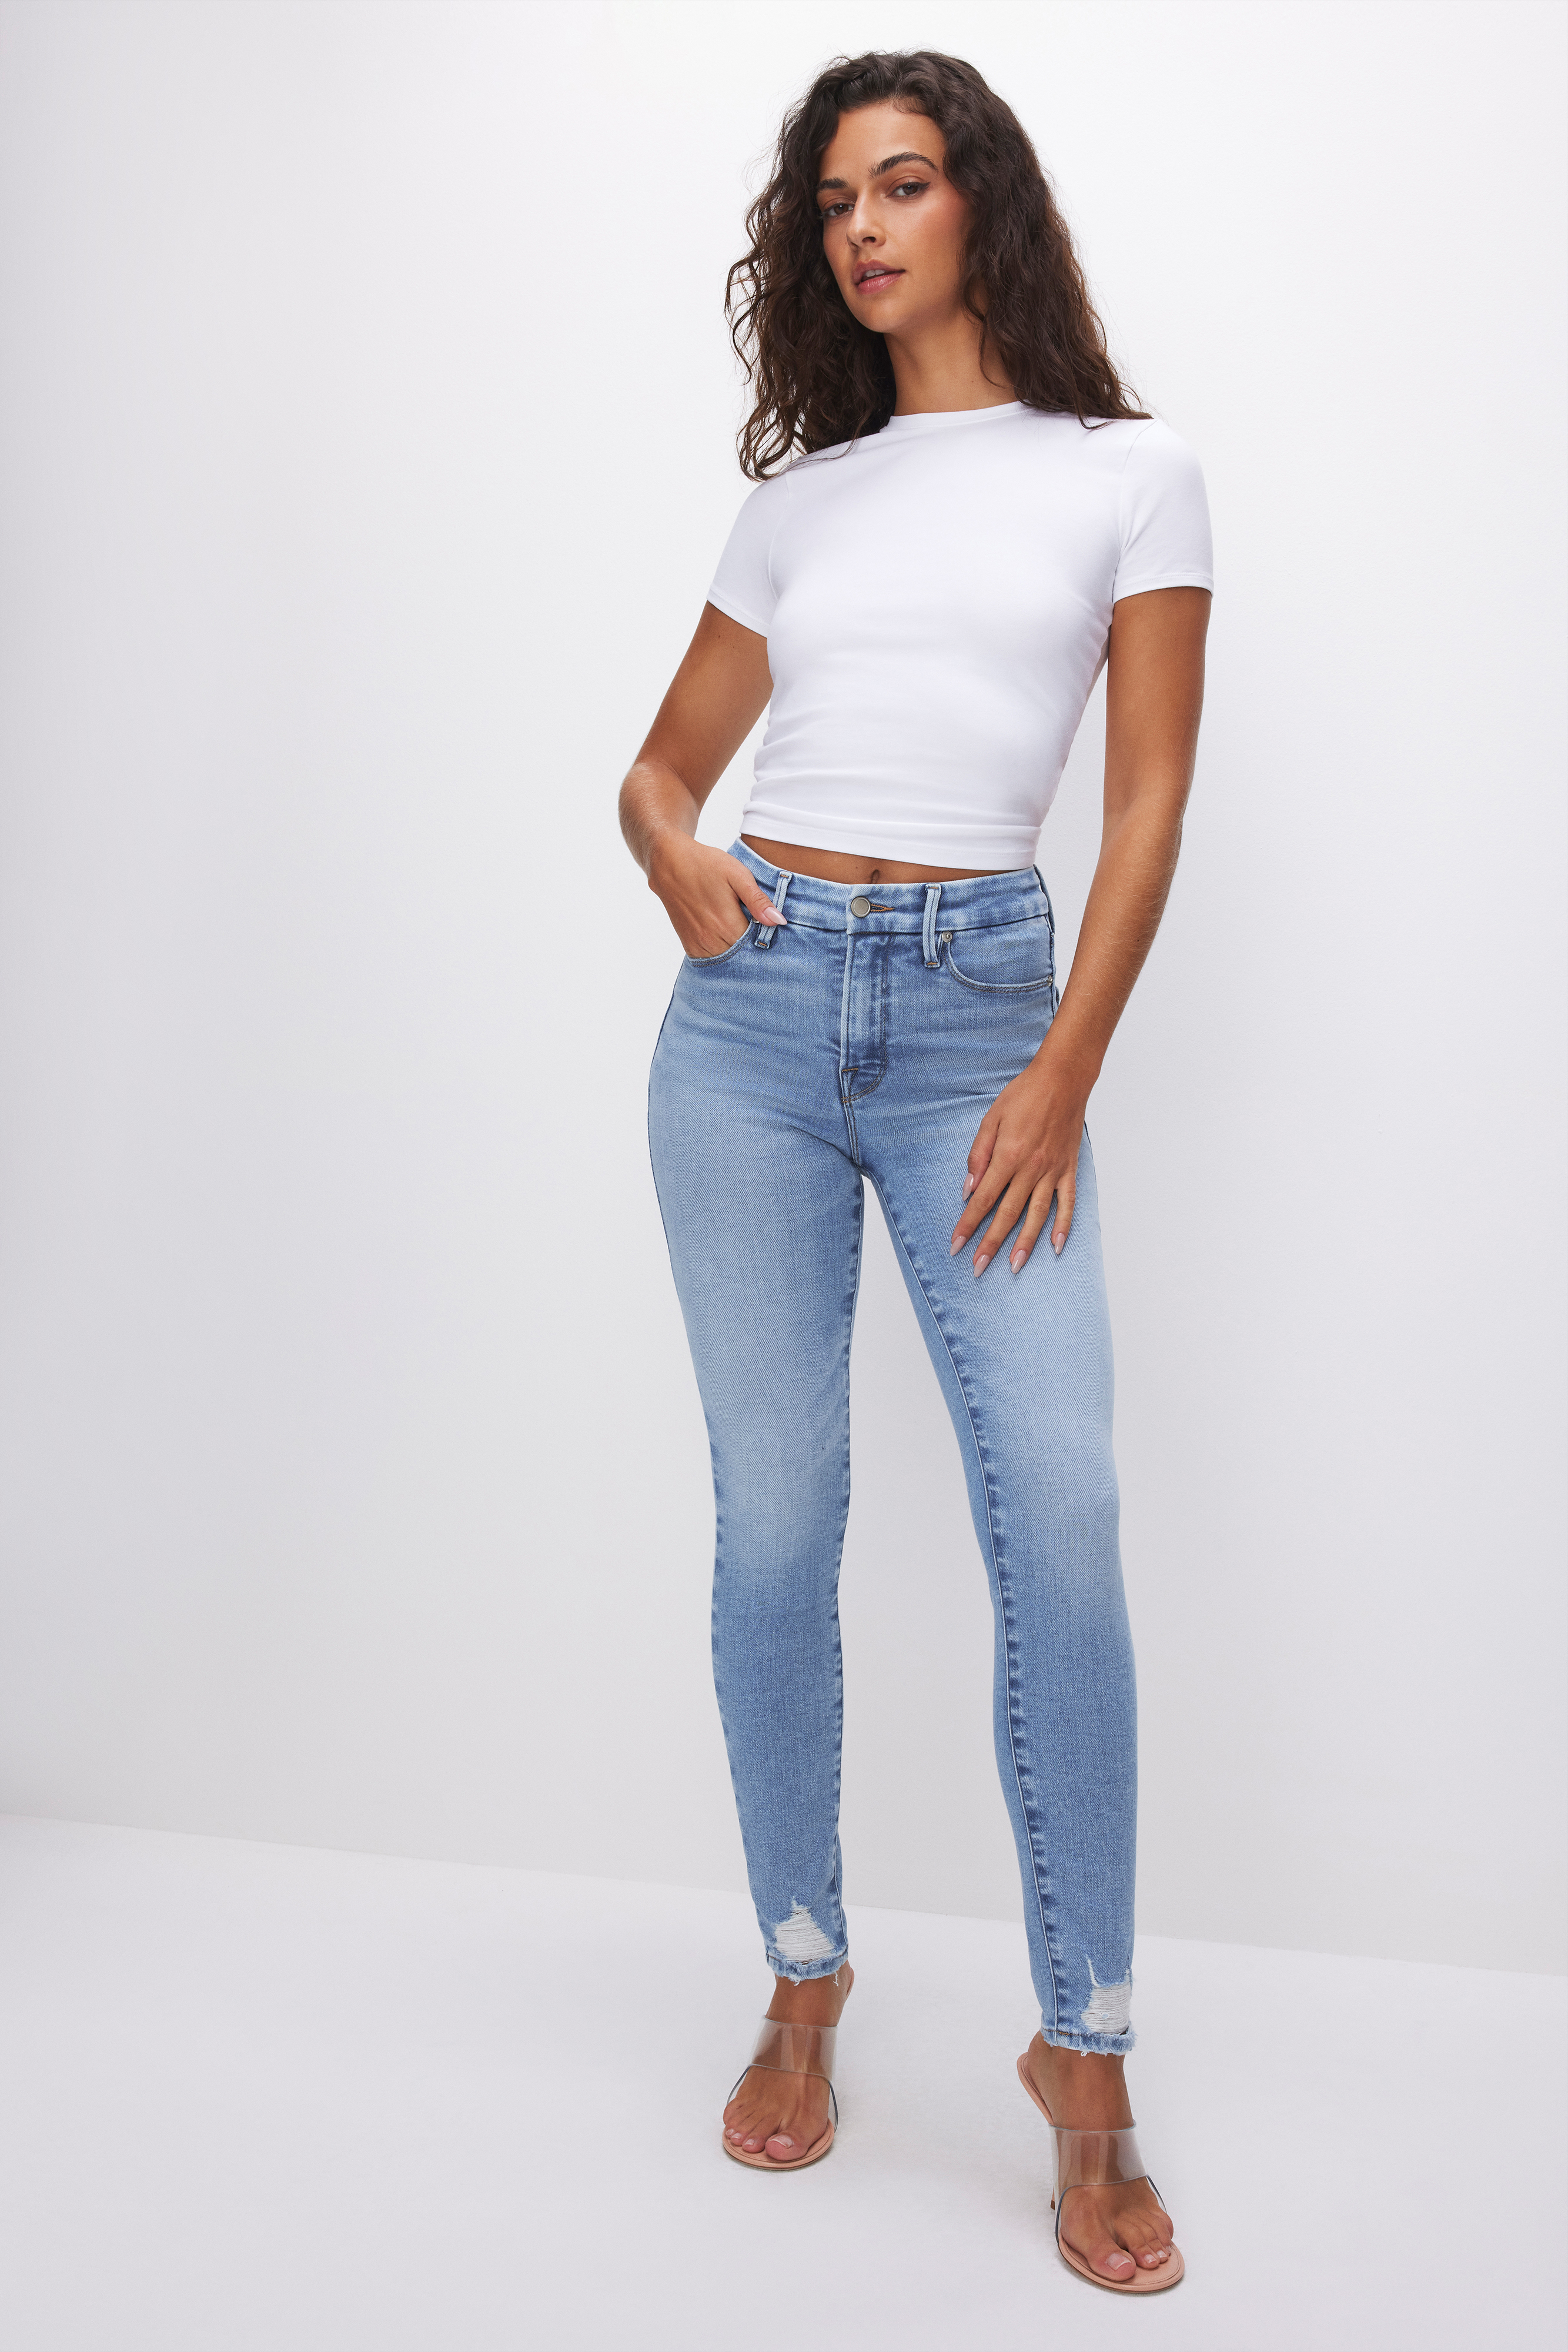 Styled with SOFT-TECH GOOD LEGS SKINNY JEANS | INDIGO506